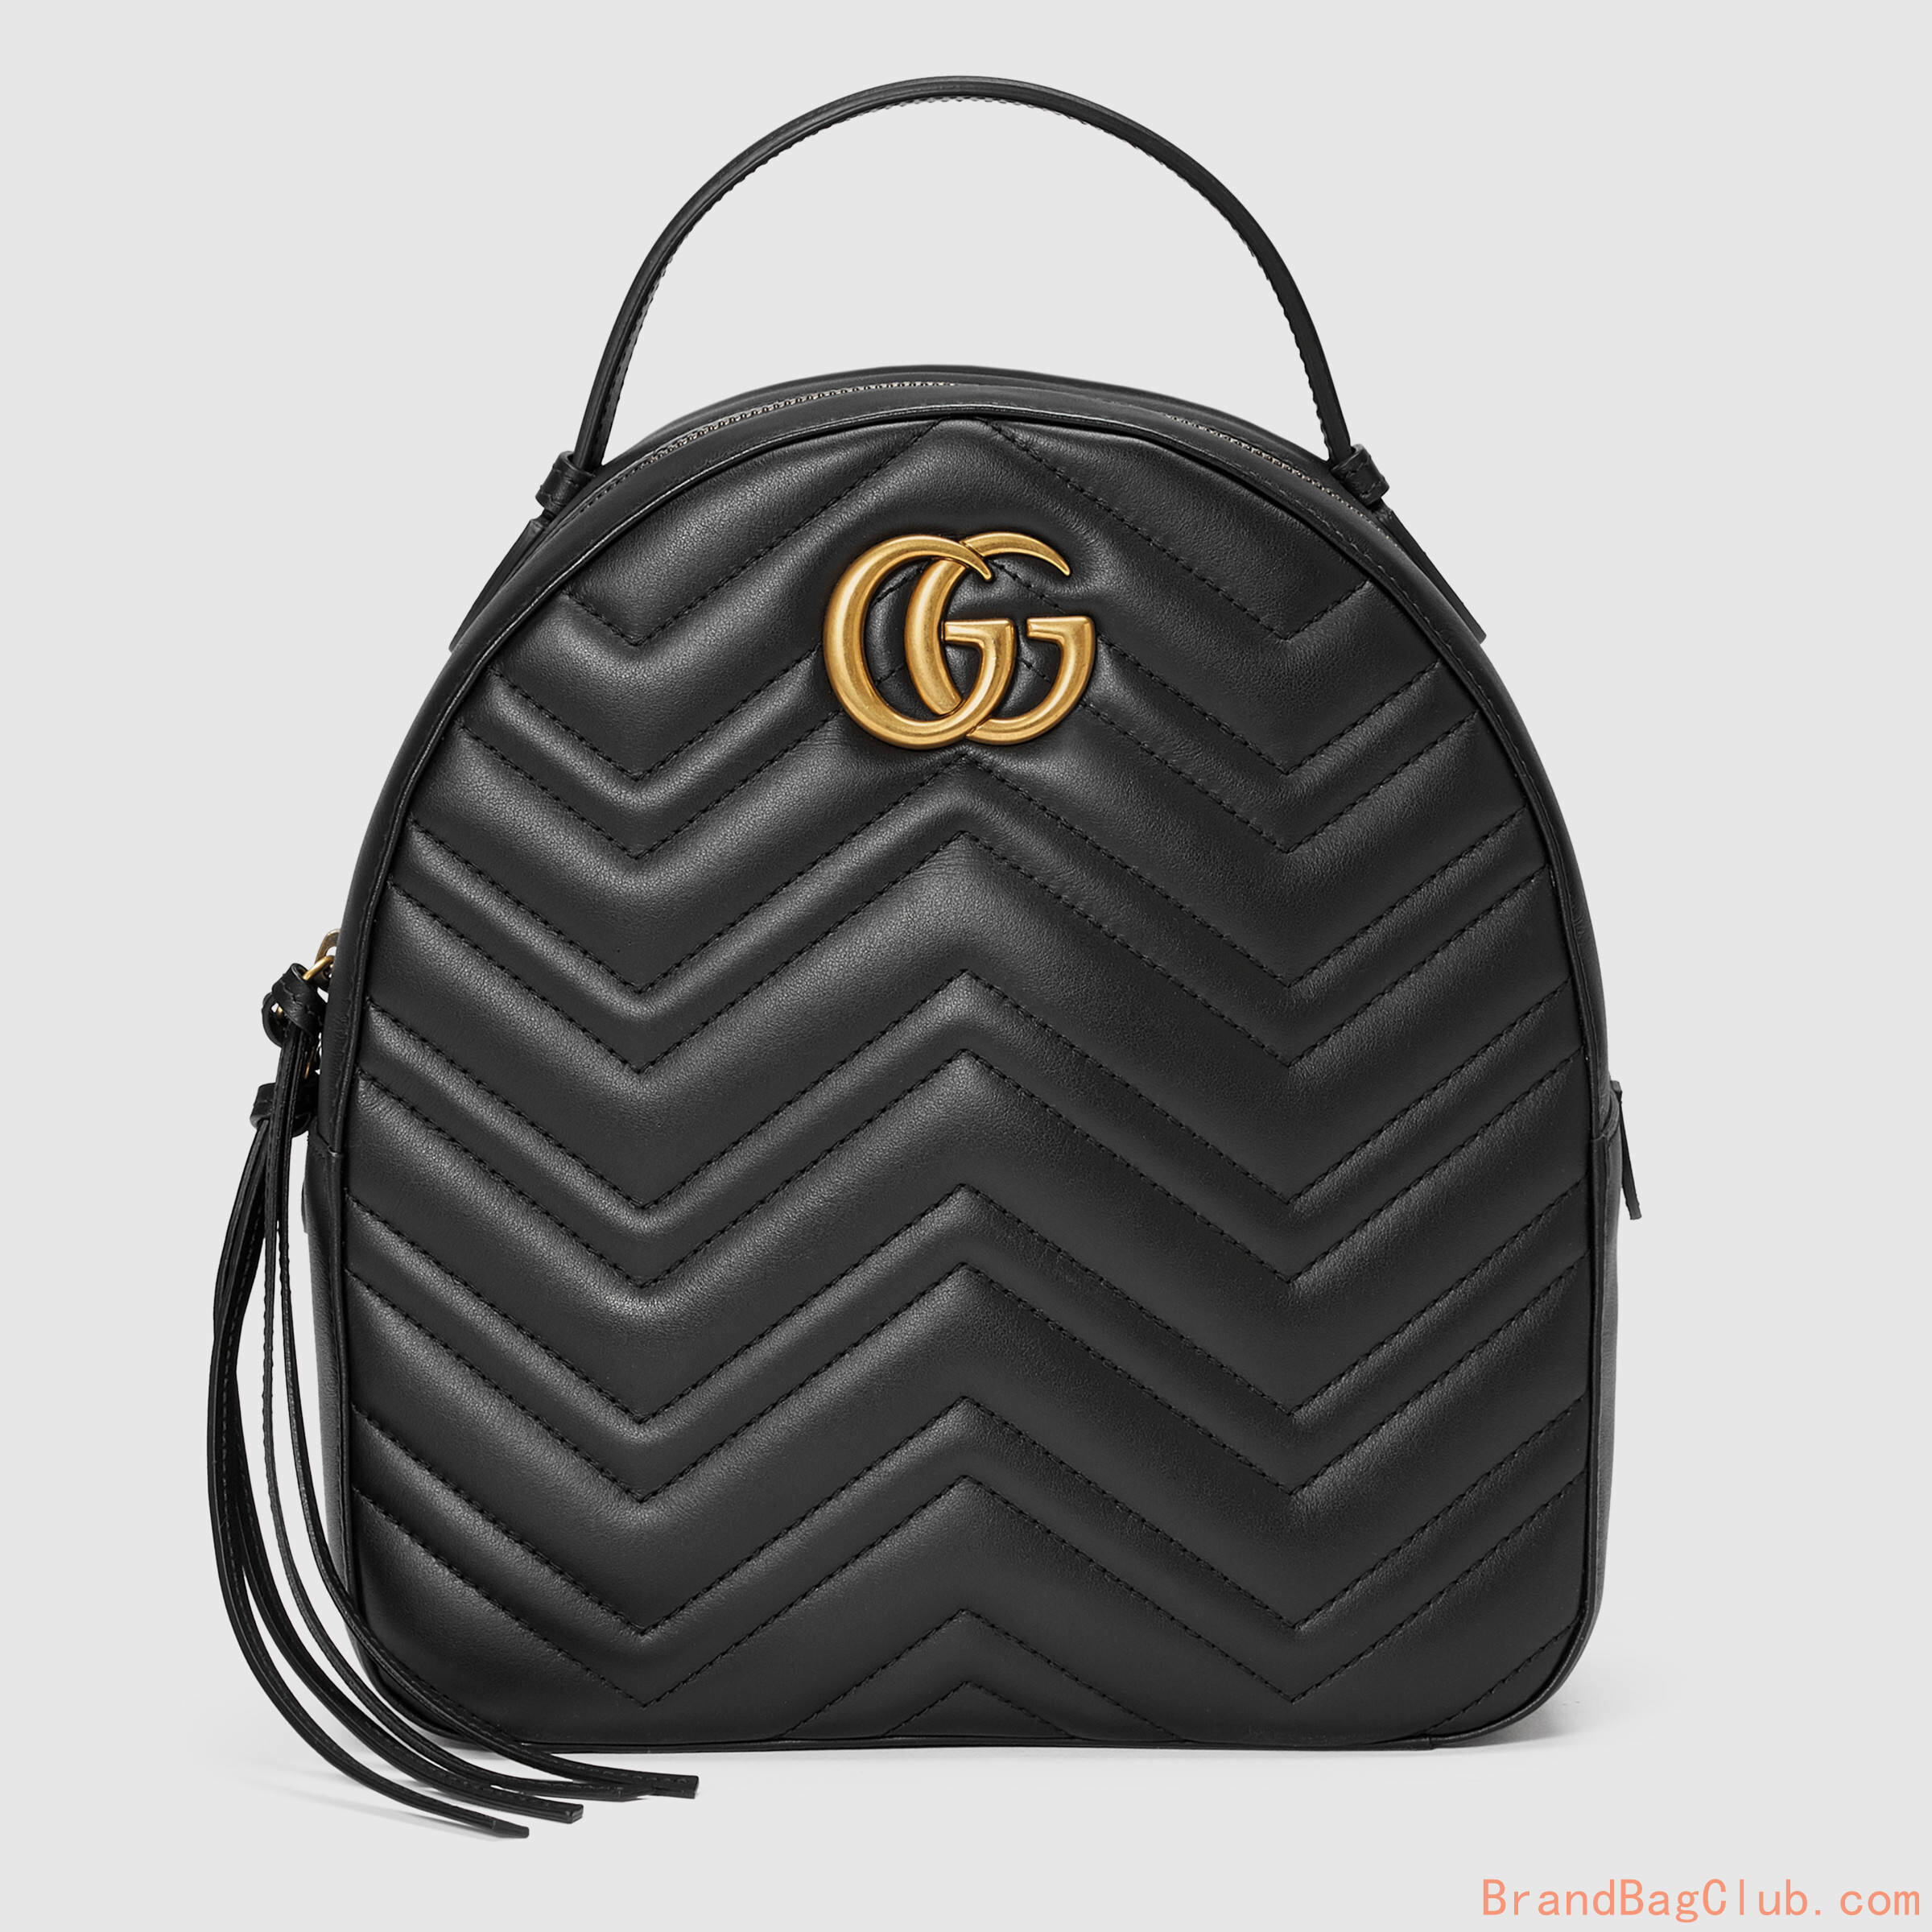 Gucci GG bag Marmont quilted leather backpack cheap gucci bags outlet online 476671 black sale